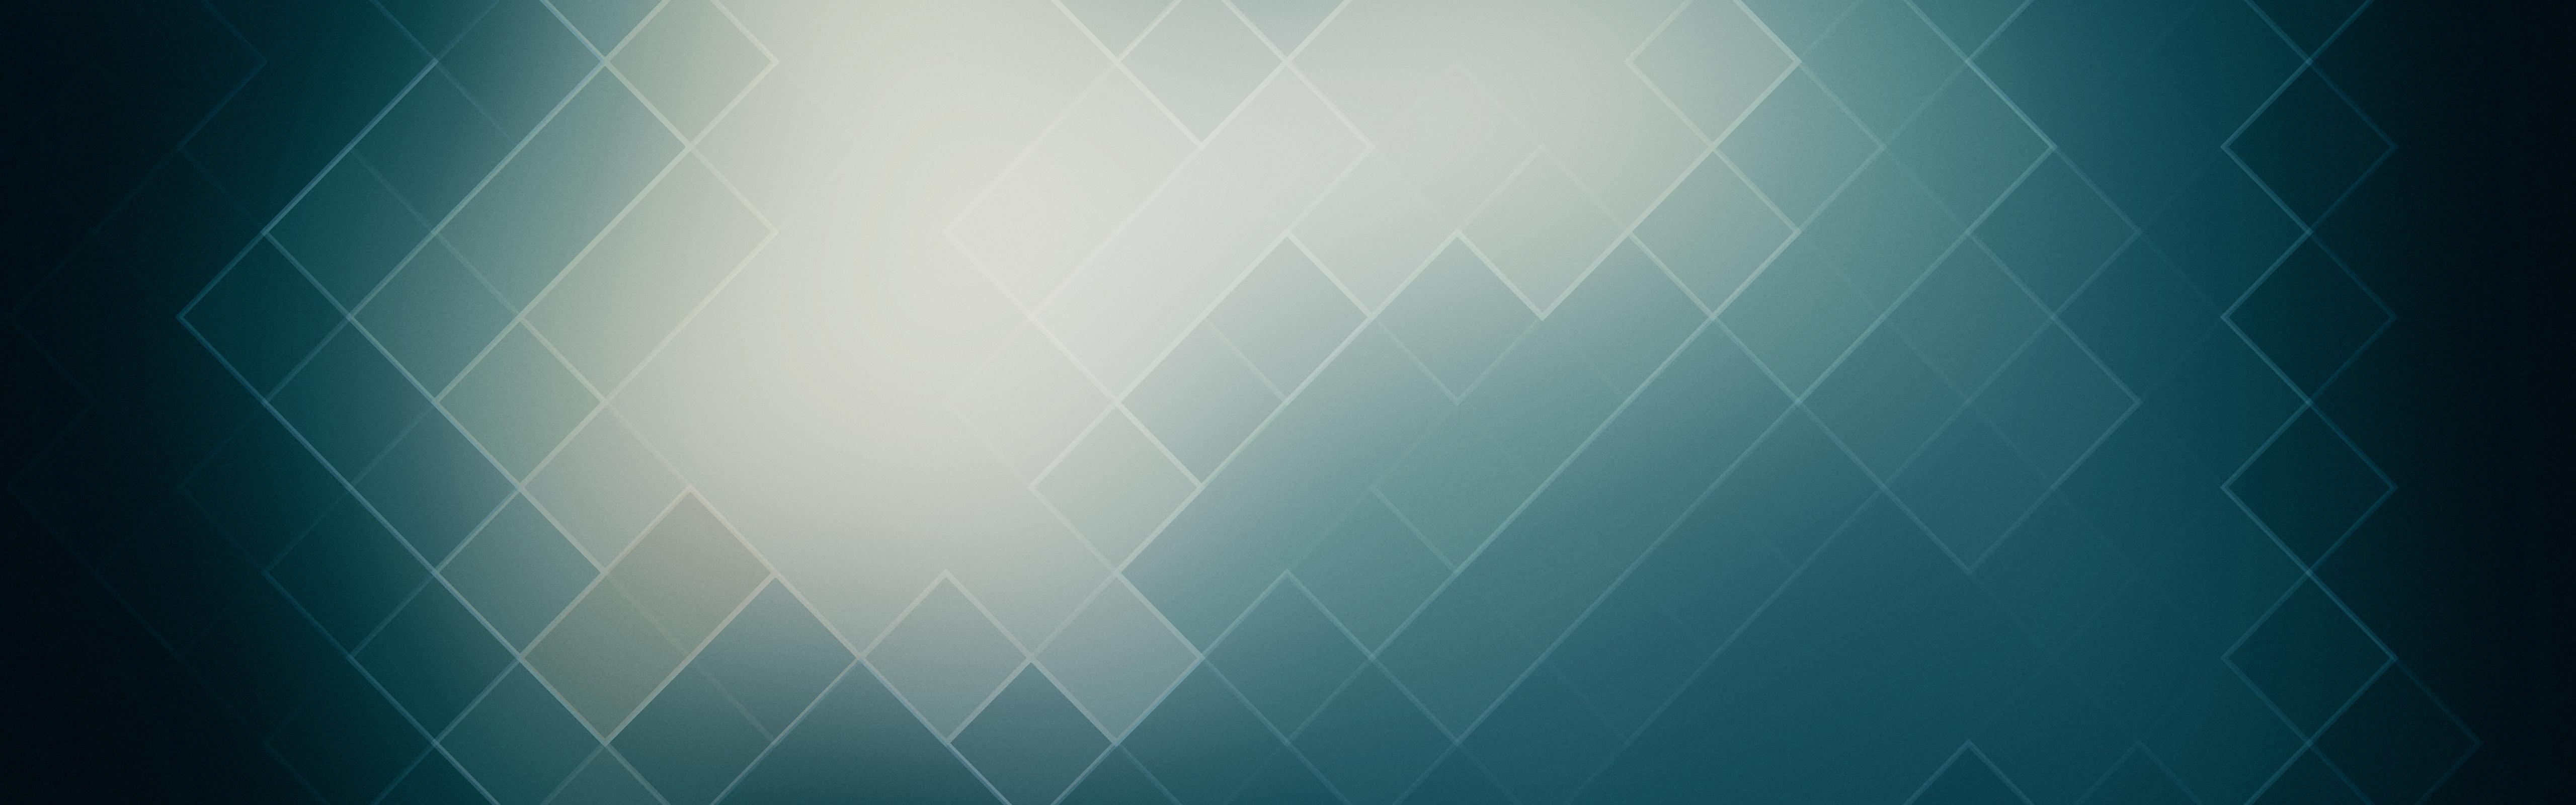 Abstract Wallpaper 3135 Pictures Backgrounds Full Size Attachment ...